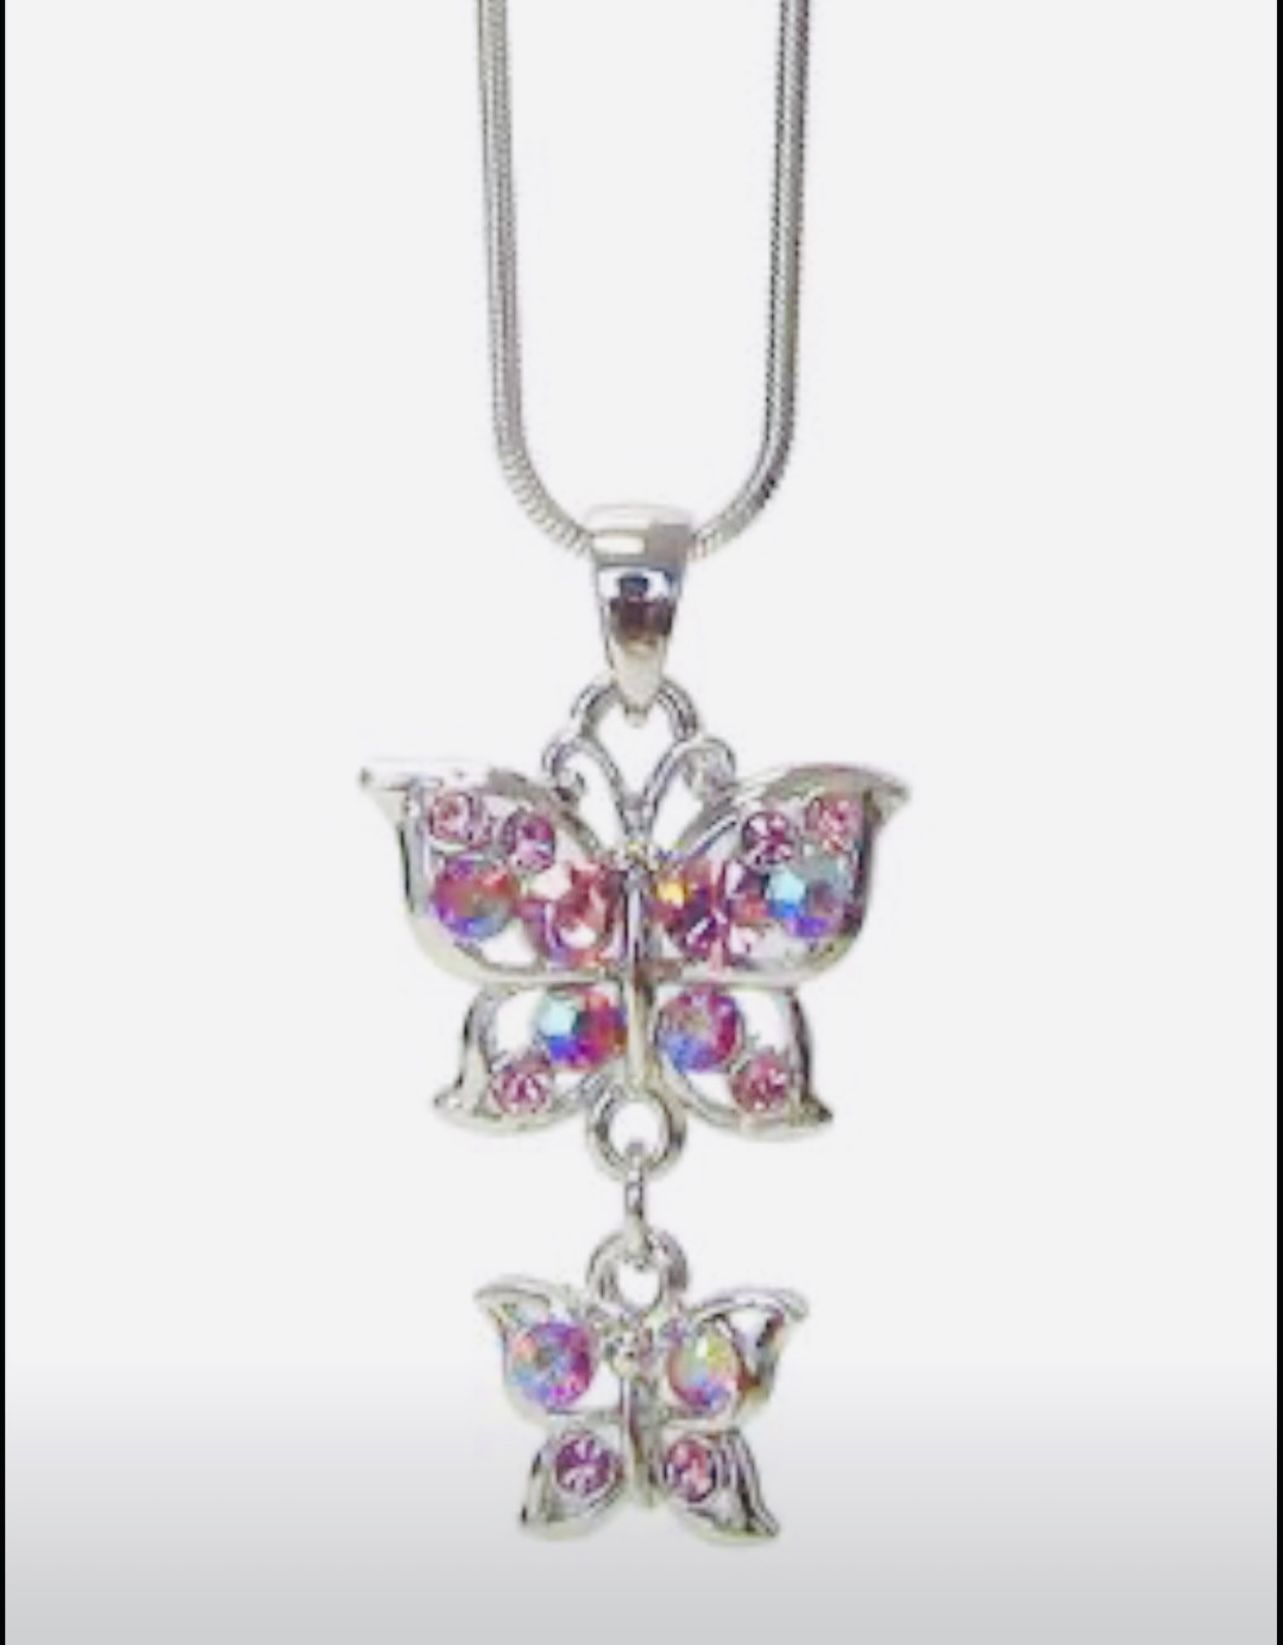 *MOTHERS DAY GIFT* ❤️ Crystal Double Aura Borealis Butterfly Pendant Necklace *See My Other 800 Items*